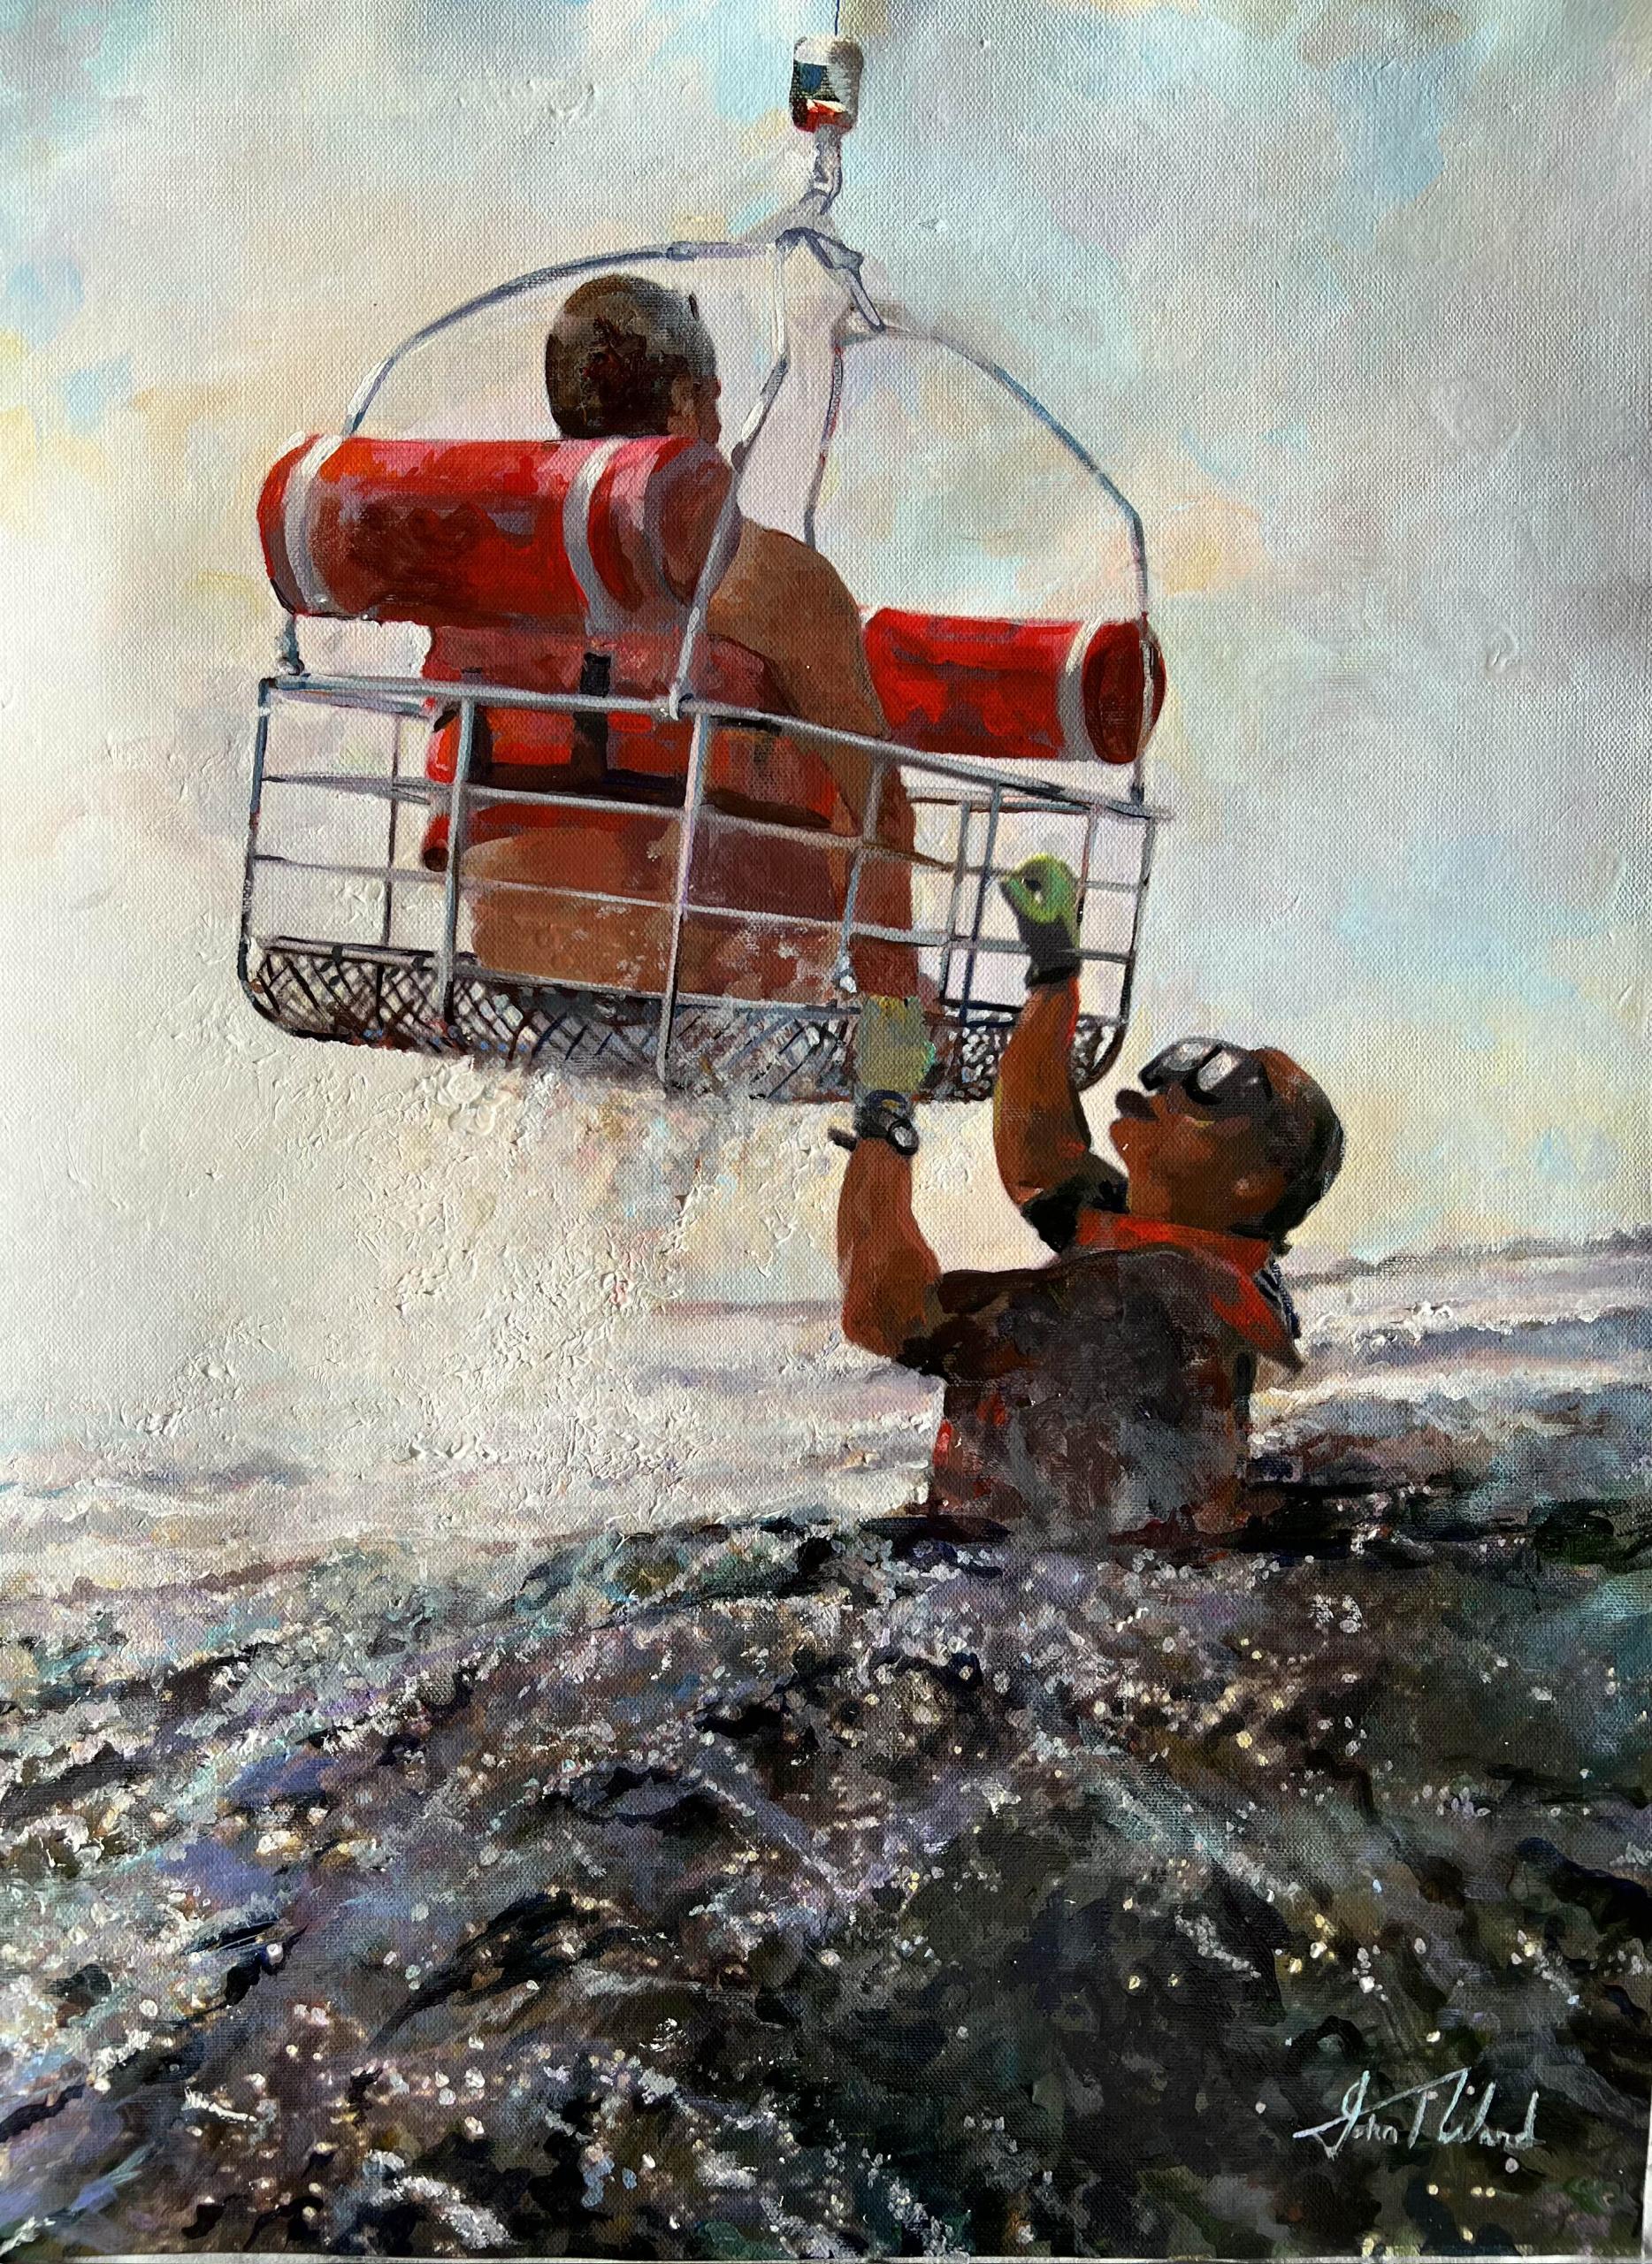 A man reaches in the ocean reaches out to a hanging vessel where a man wearing a life jacket sits.